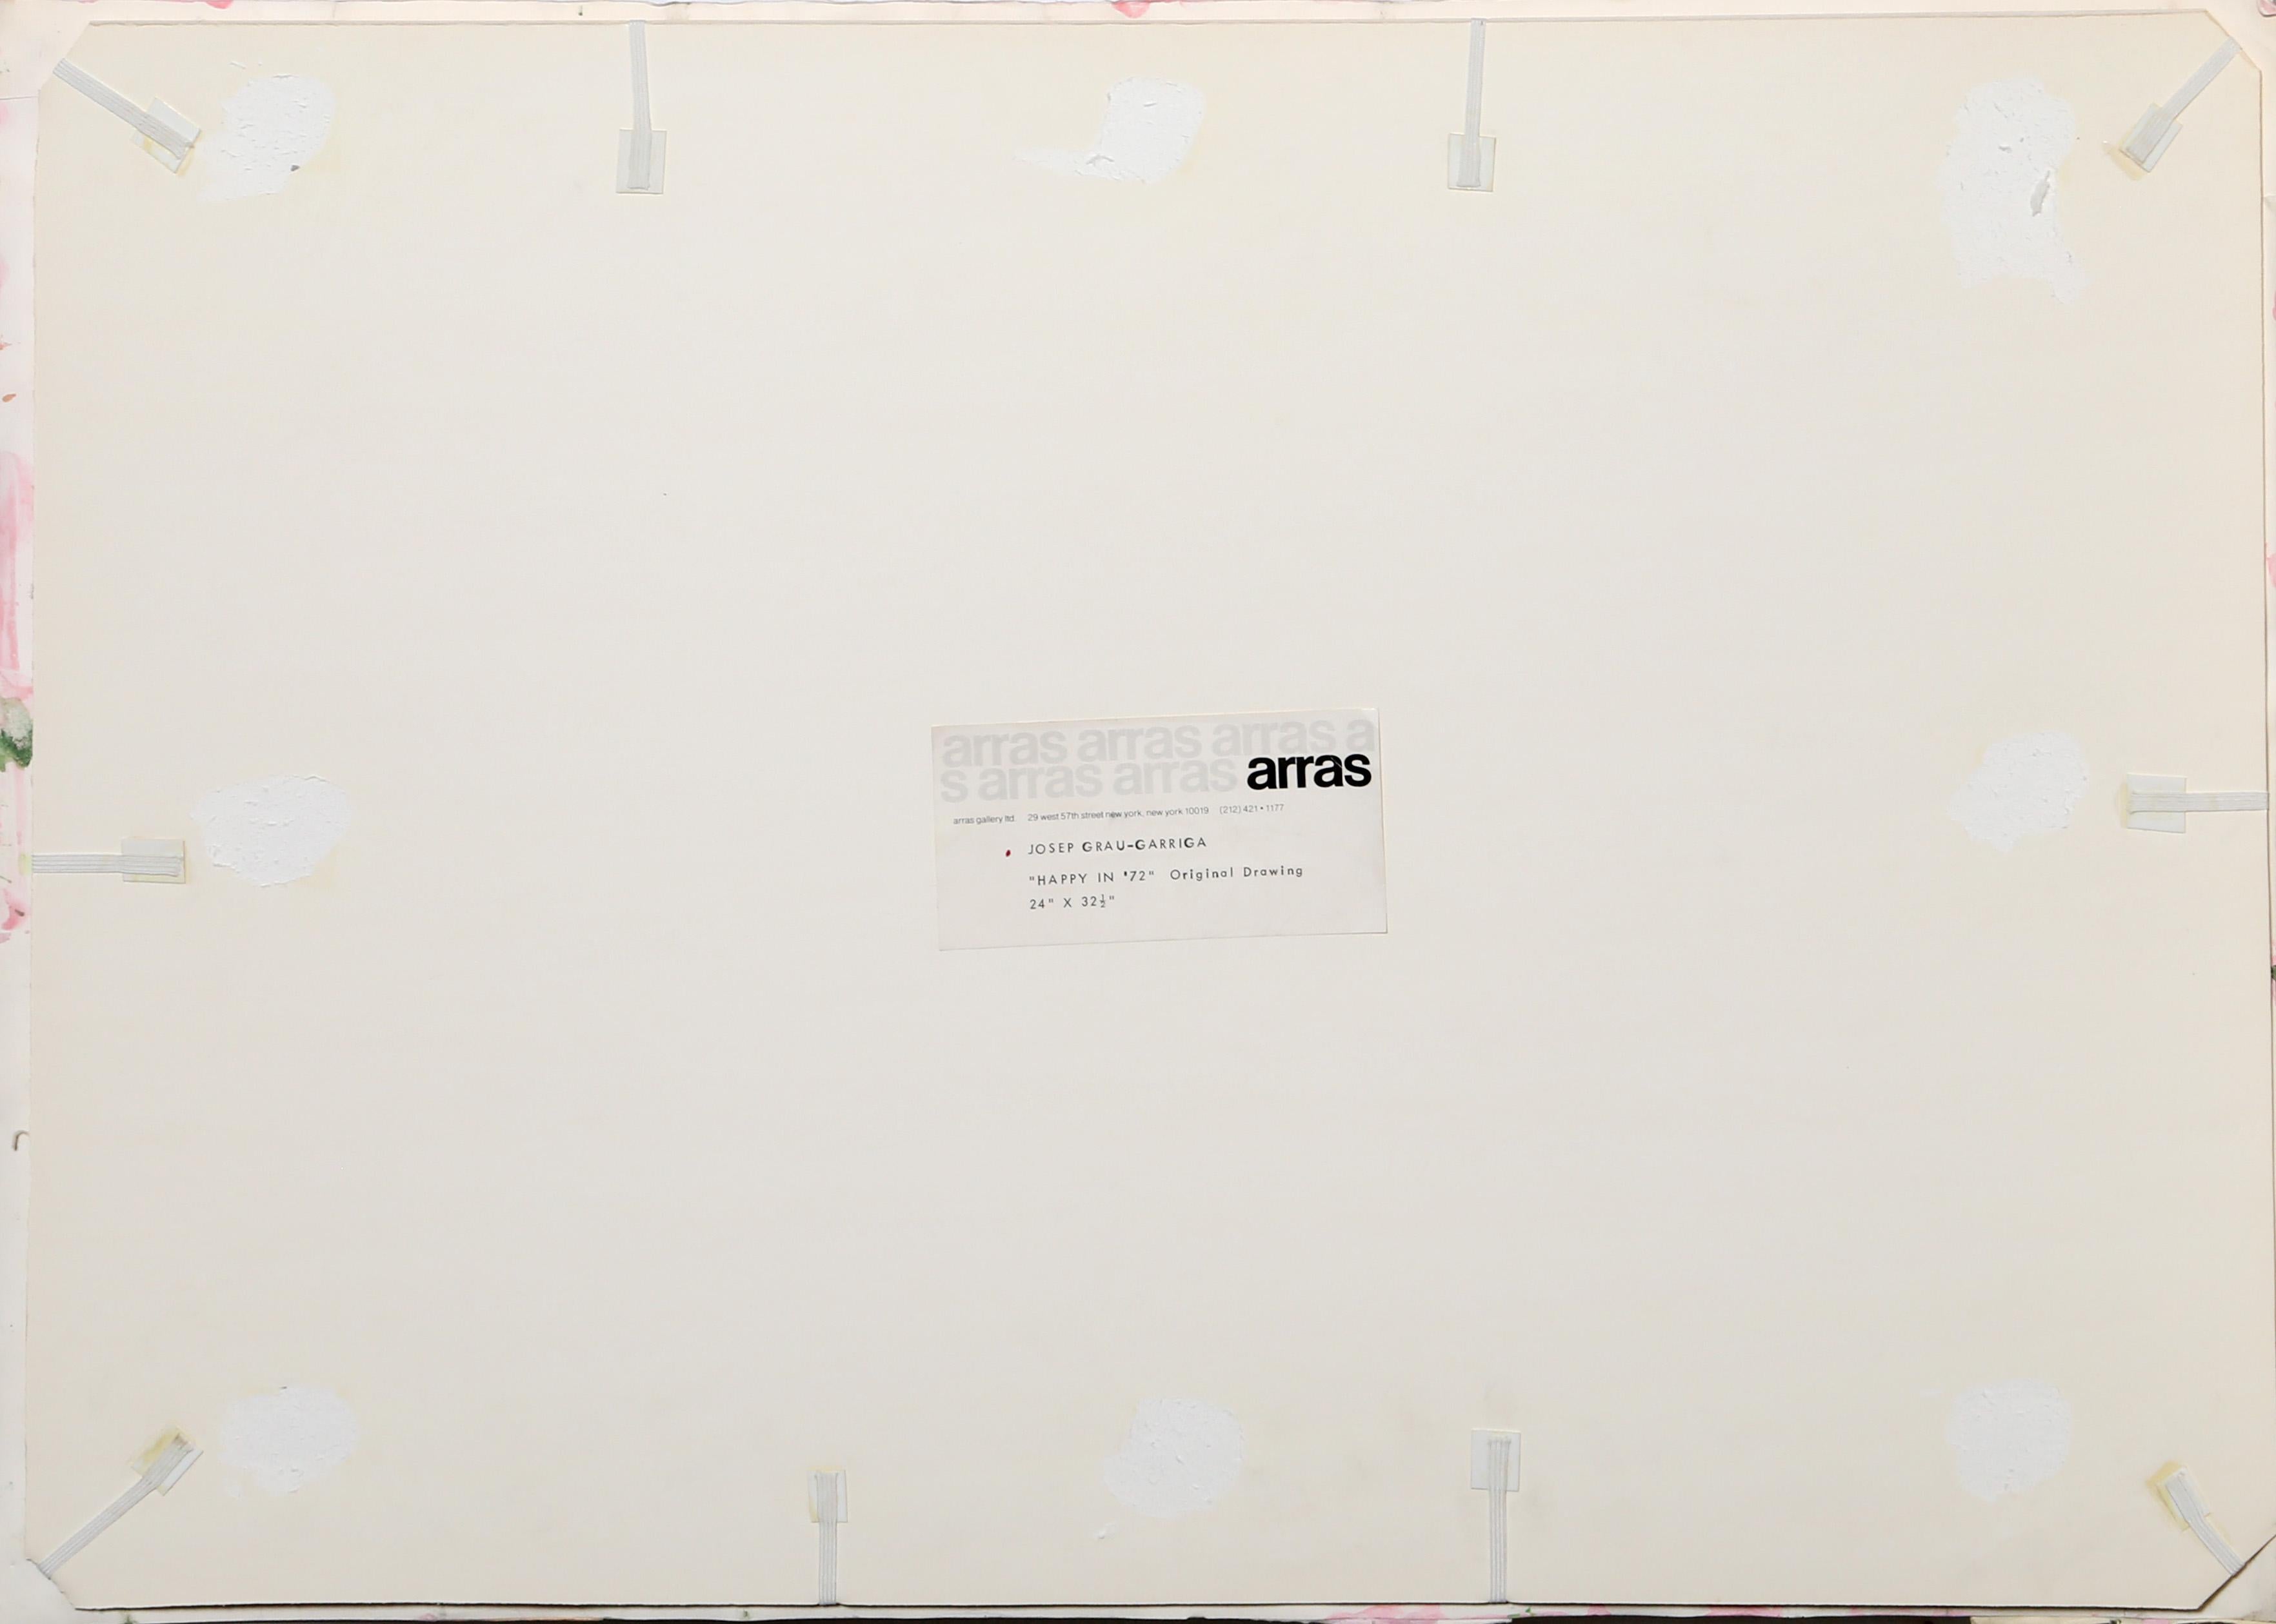 Happy in '72, Abstract Painting by Josep Grau-Garriga For Sale 2